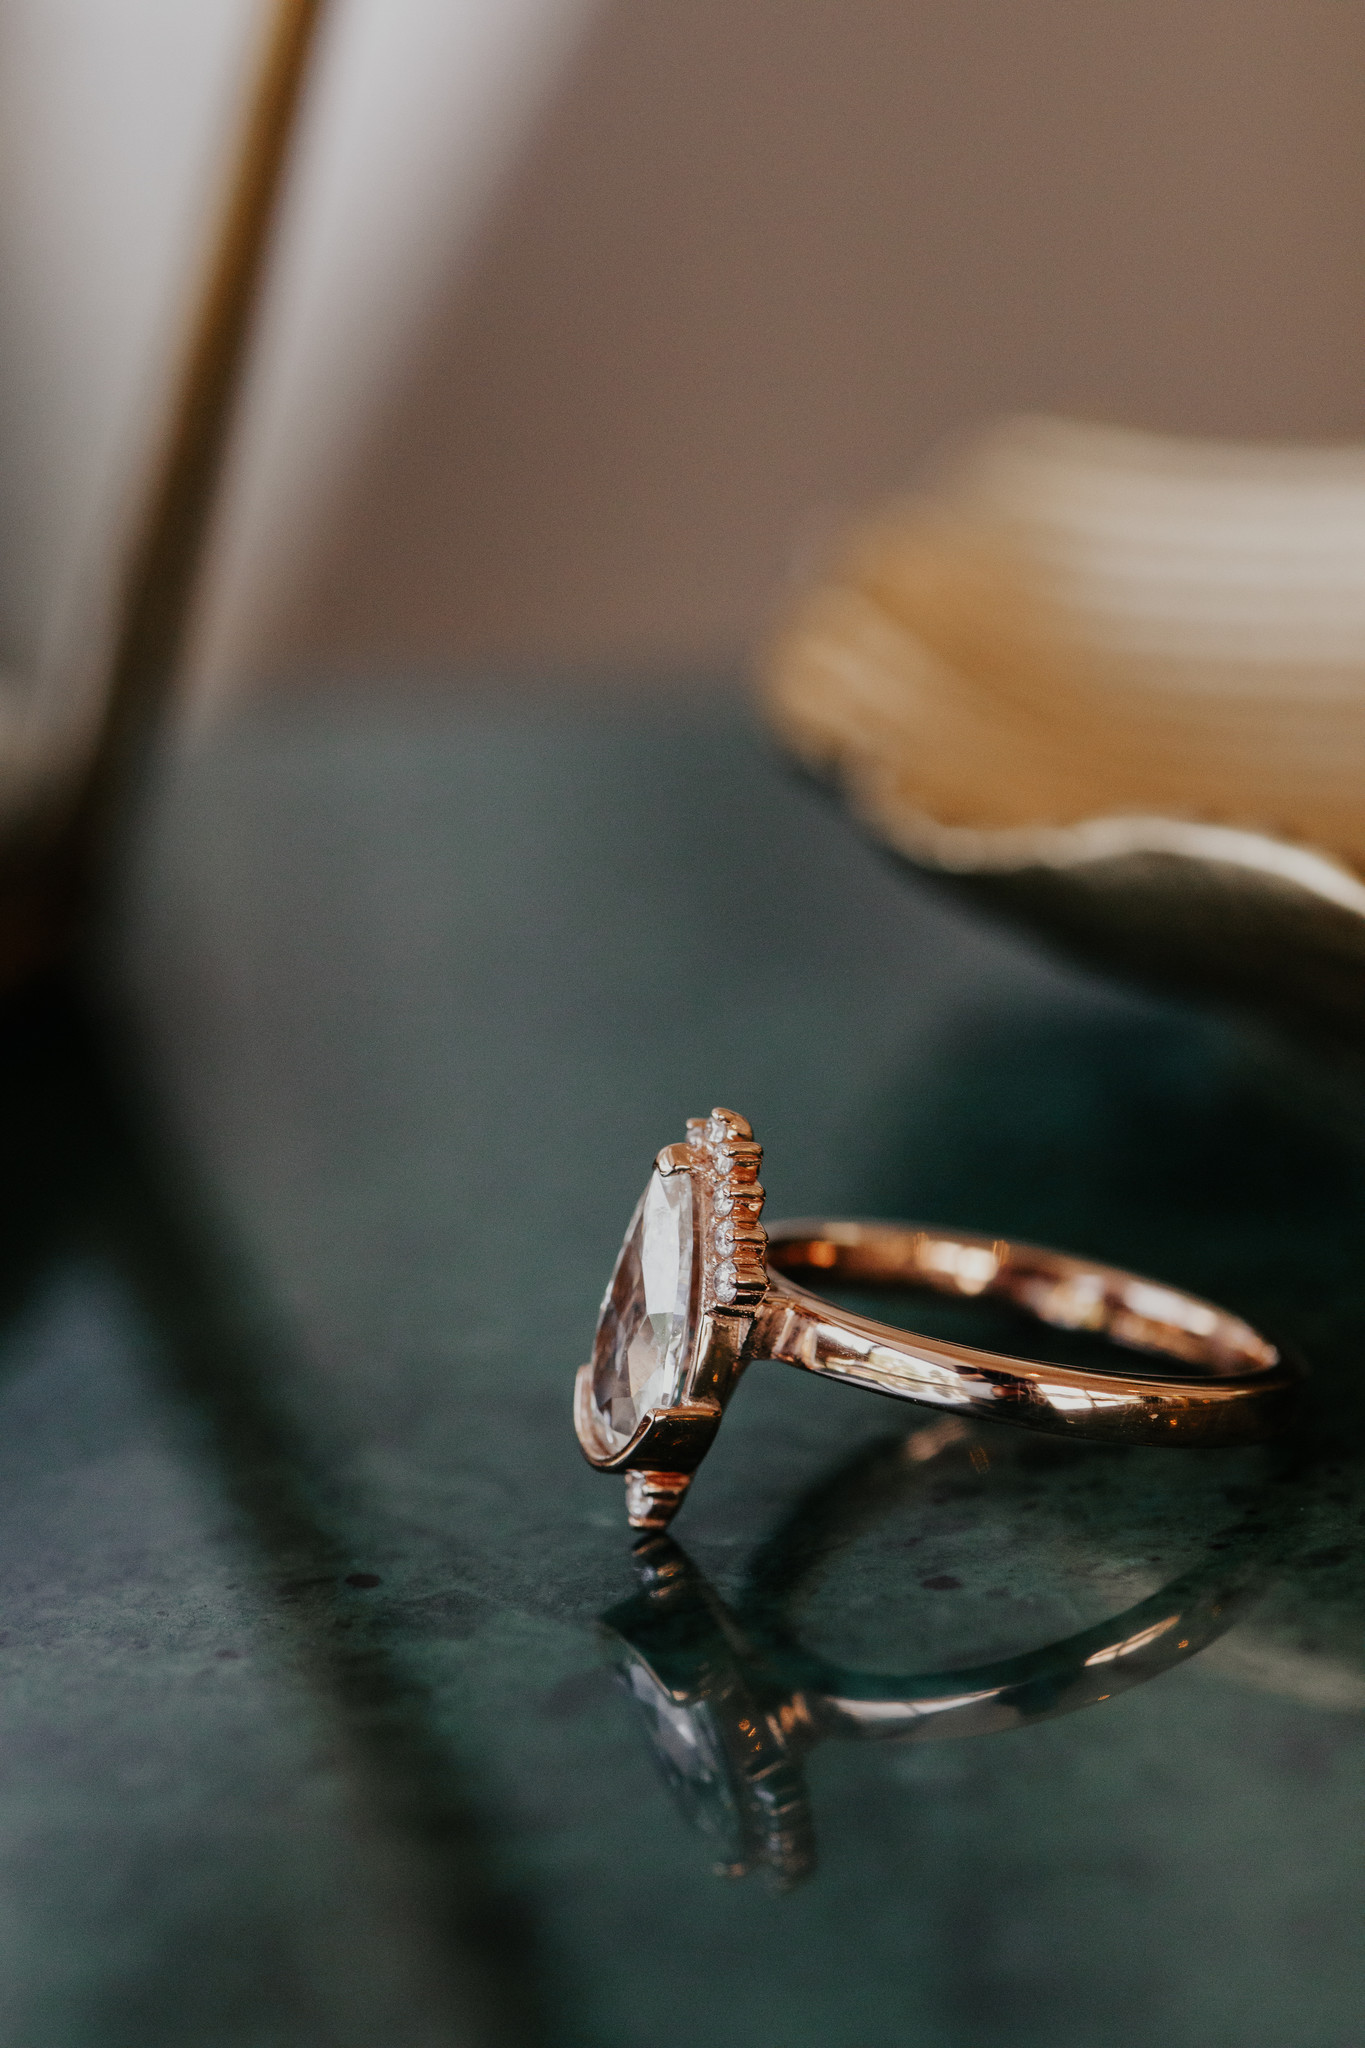 Jewelry Store vs. Pawn Shop to Buy Engagement Rings